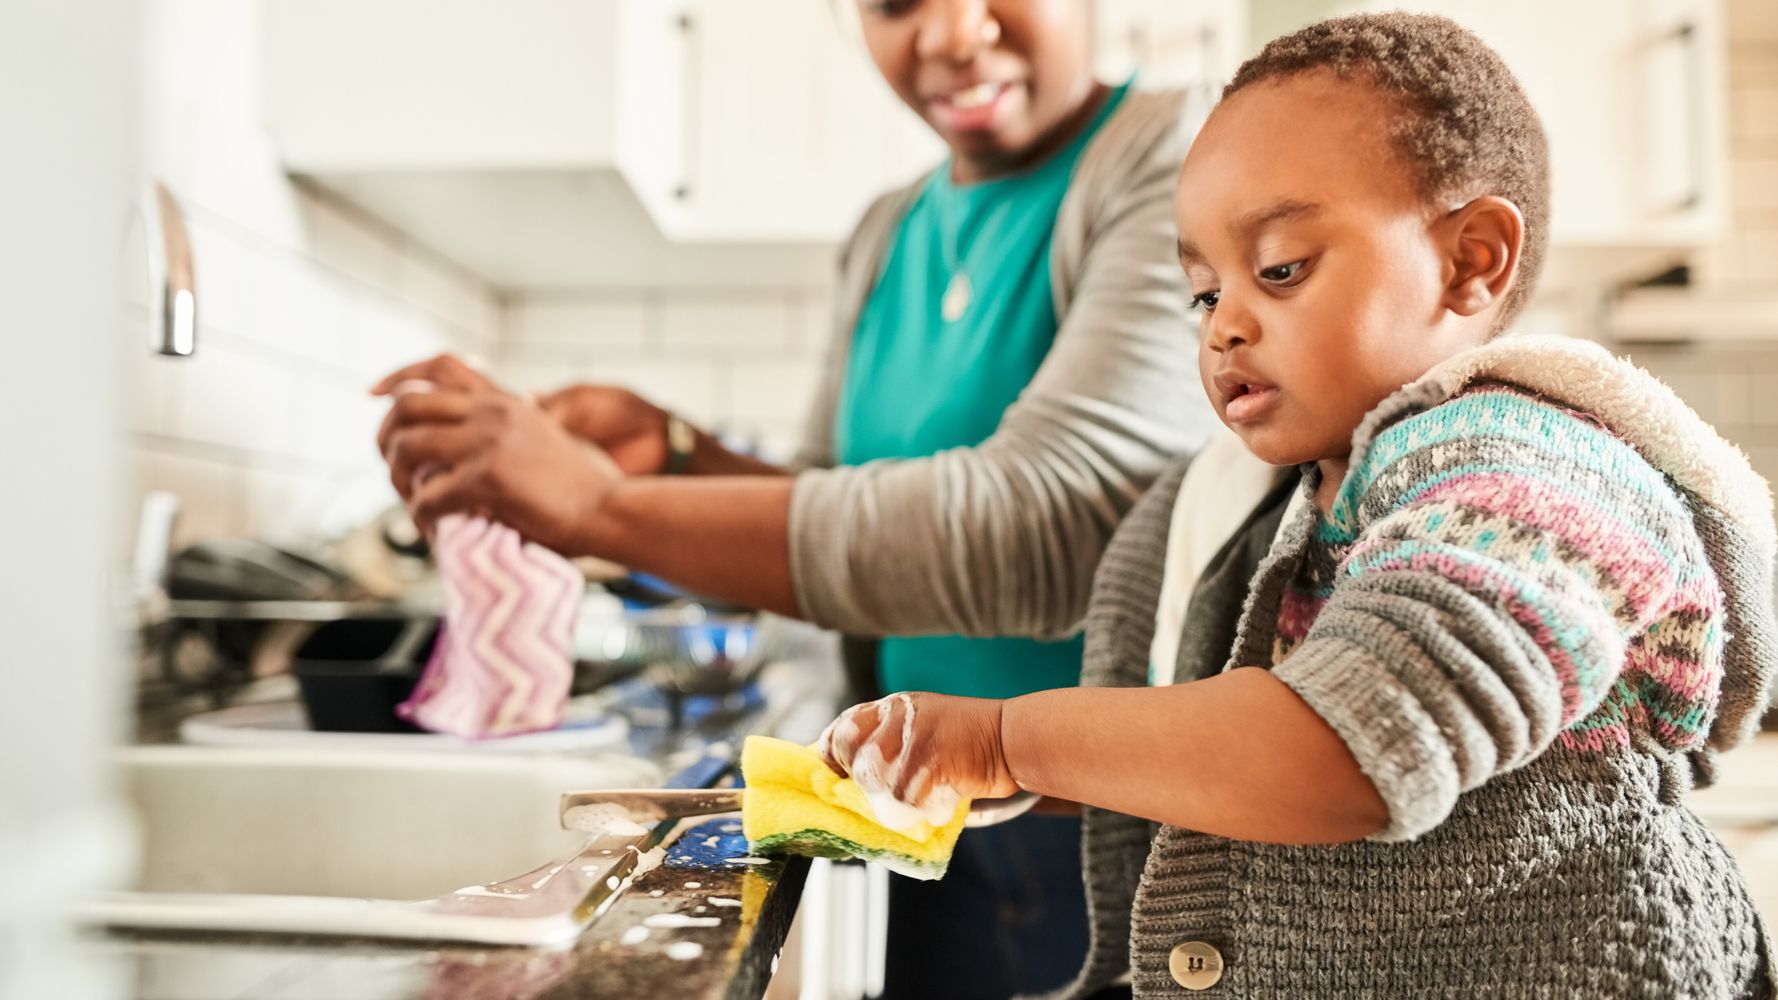 Don’t Want Entitled Kids? Experts Say Load Them Up With Chores.